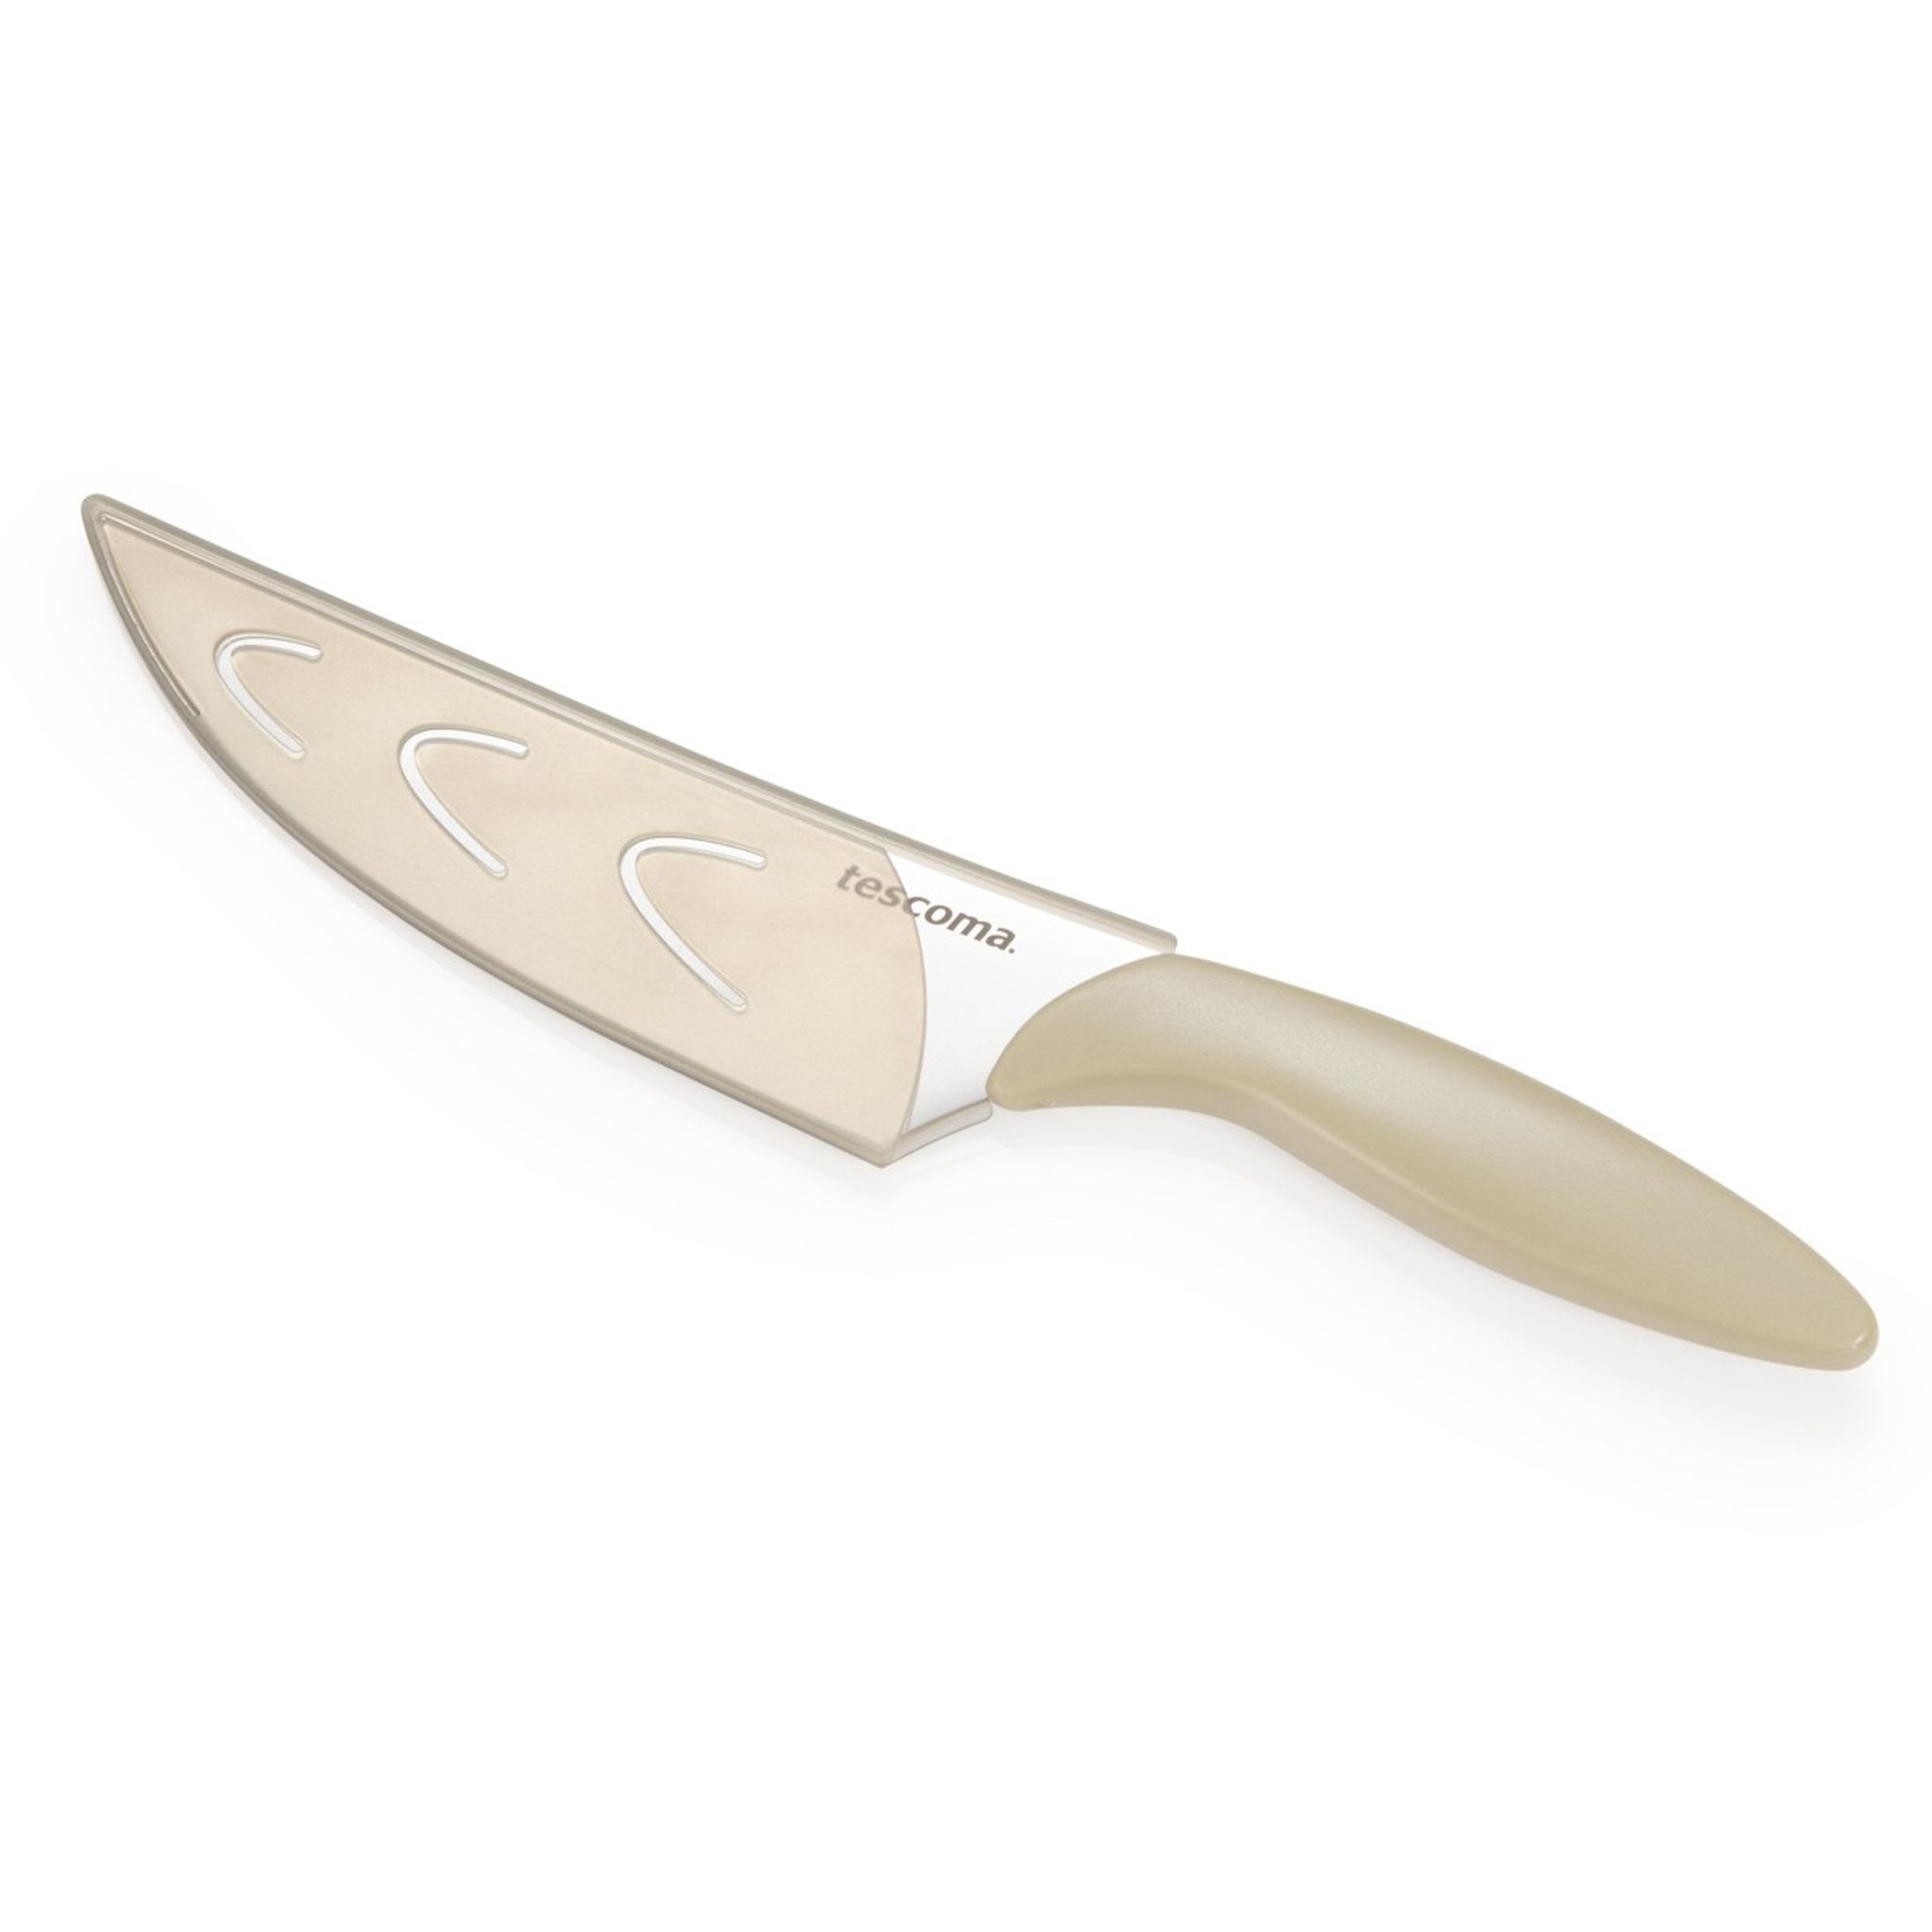 Cook’s knife MicroBlade MOVE 17 cm, with protective sheath